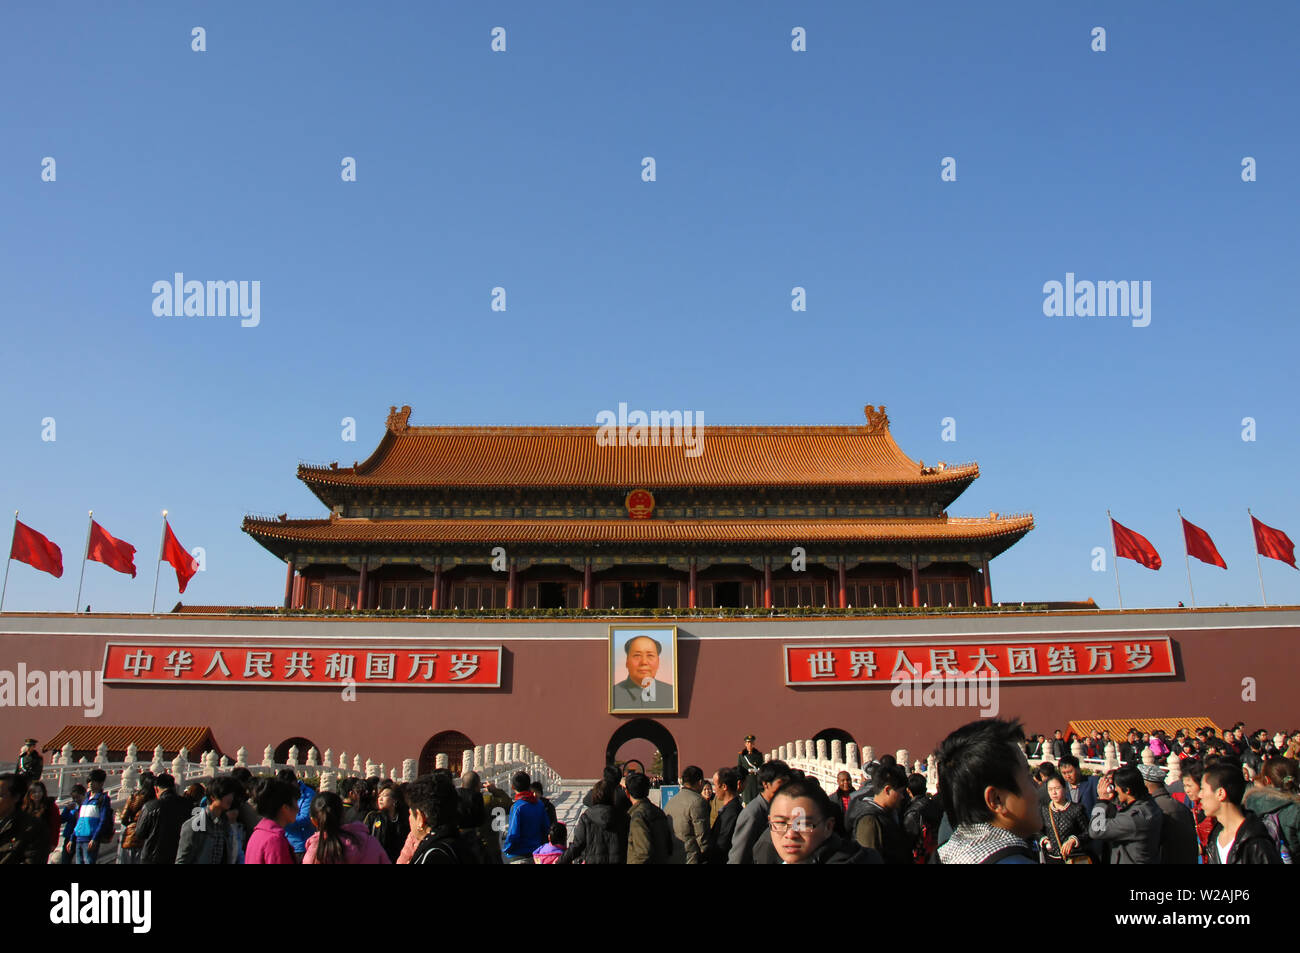 People in front of the Gate of Heavenly Peace in Tiananmen Square, Beijing, China. Tiananmen Square is a Beijing landmark visited by tourists. Stock Photo